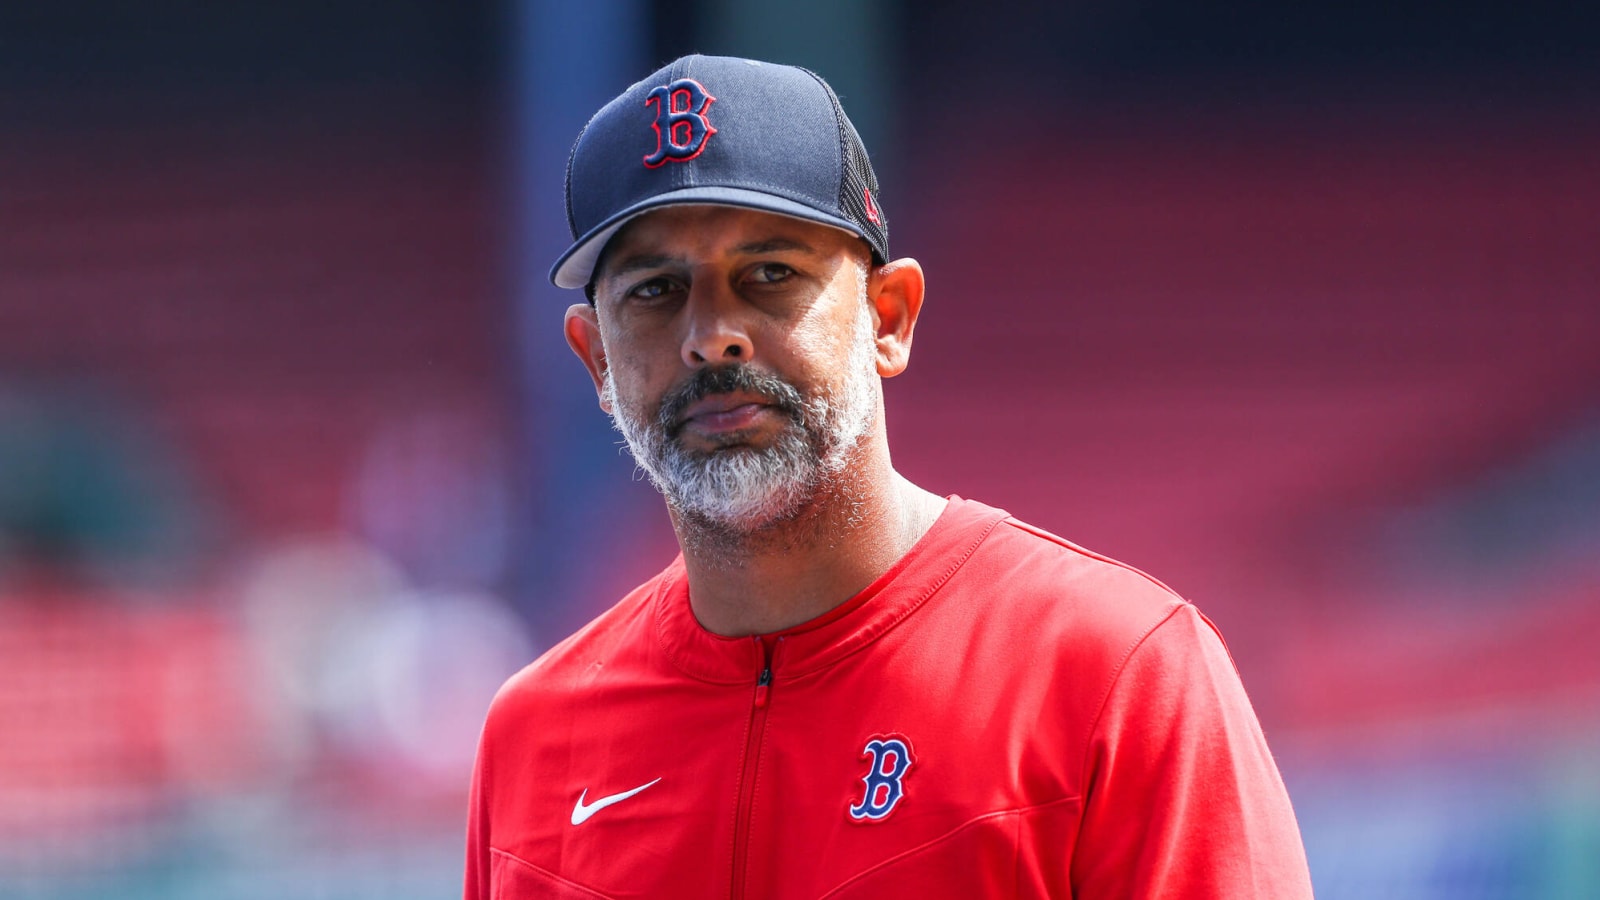 Red Sox manager Alex Cora tests positive for COVID-19